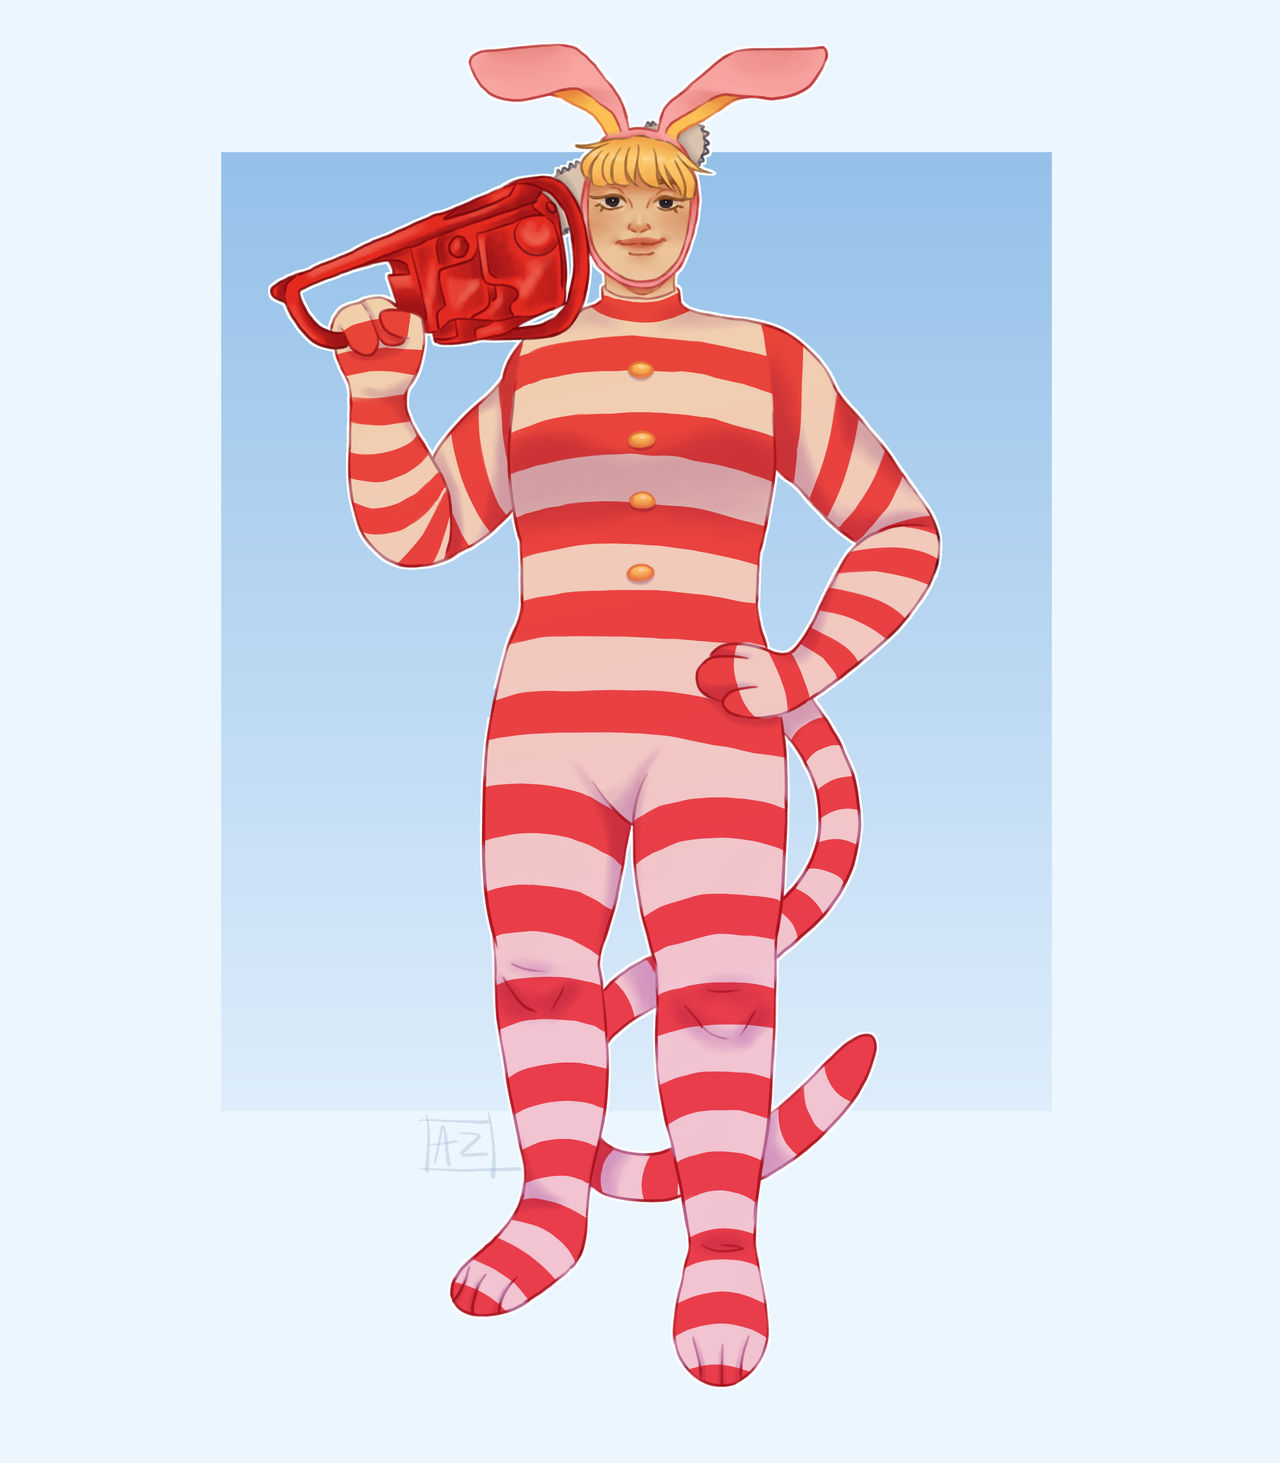 Clothing Shoes Accessories Popee Cosplay Costume Popee The Performer White And Red Pajamas Plush Bunny Ear Costumes